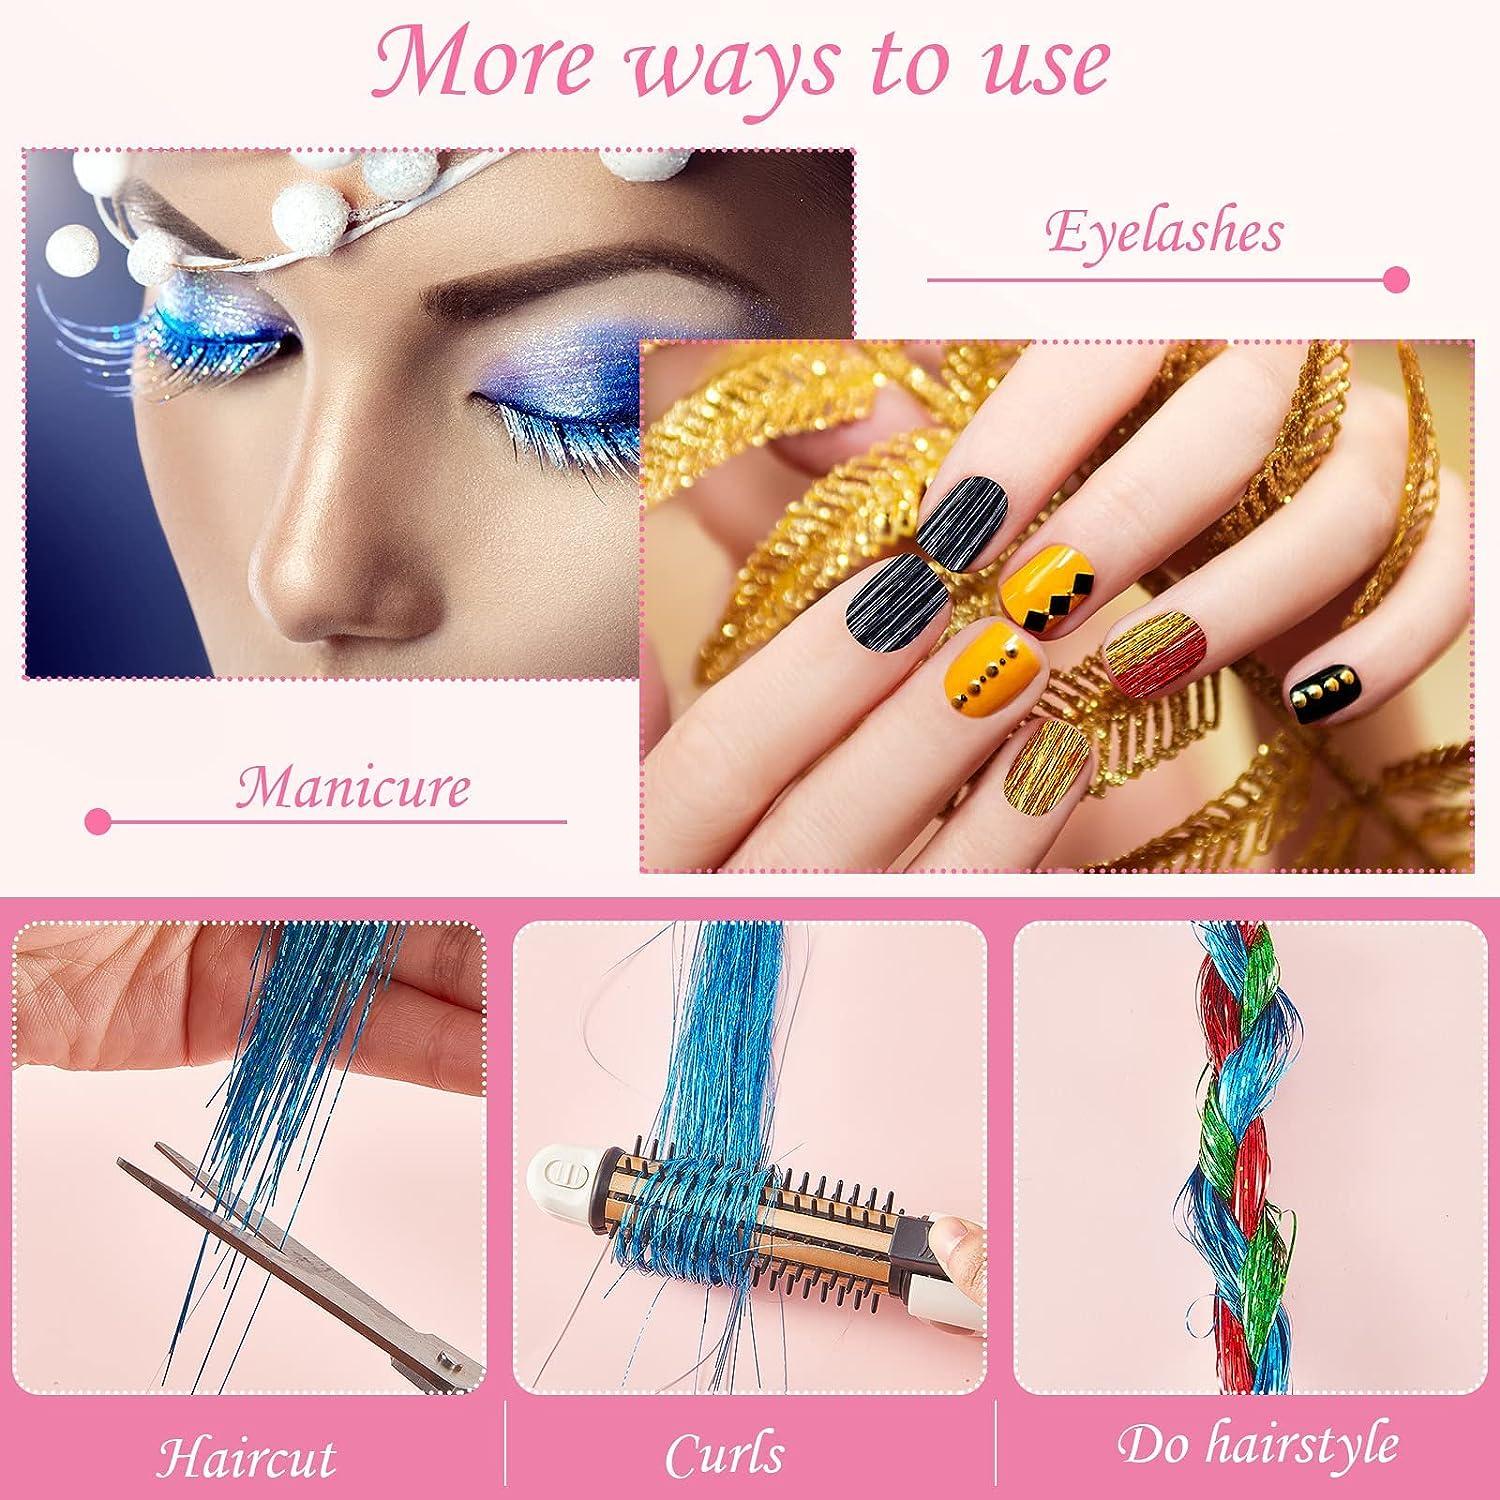 Feathers for hair extension synthetic colorful strands of fake feathers in  hair accessories for women hairpiece extensions